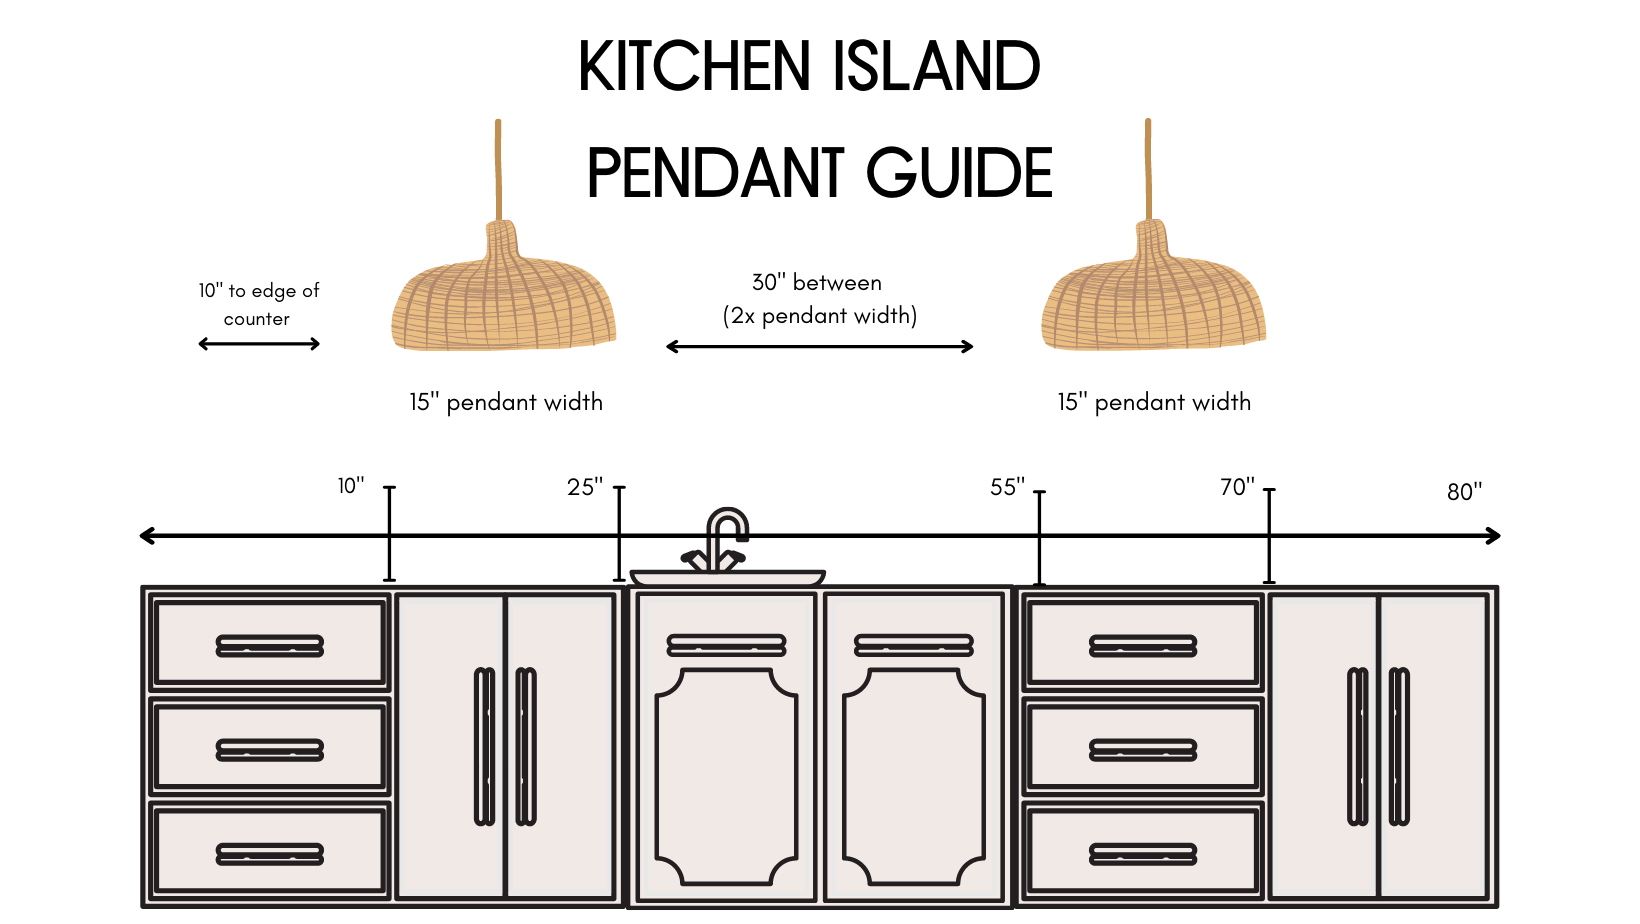 This graphic shows the best spacing and size for kitchen island lighting 